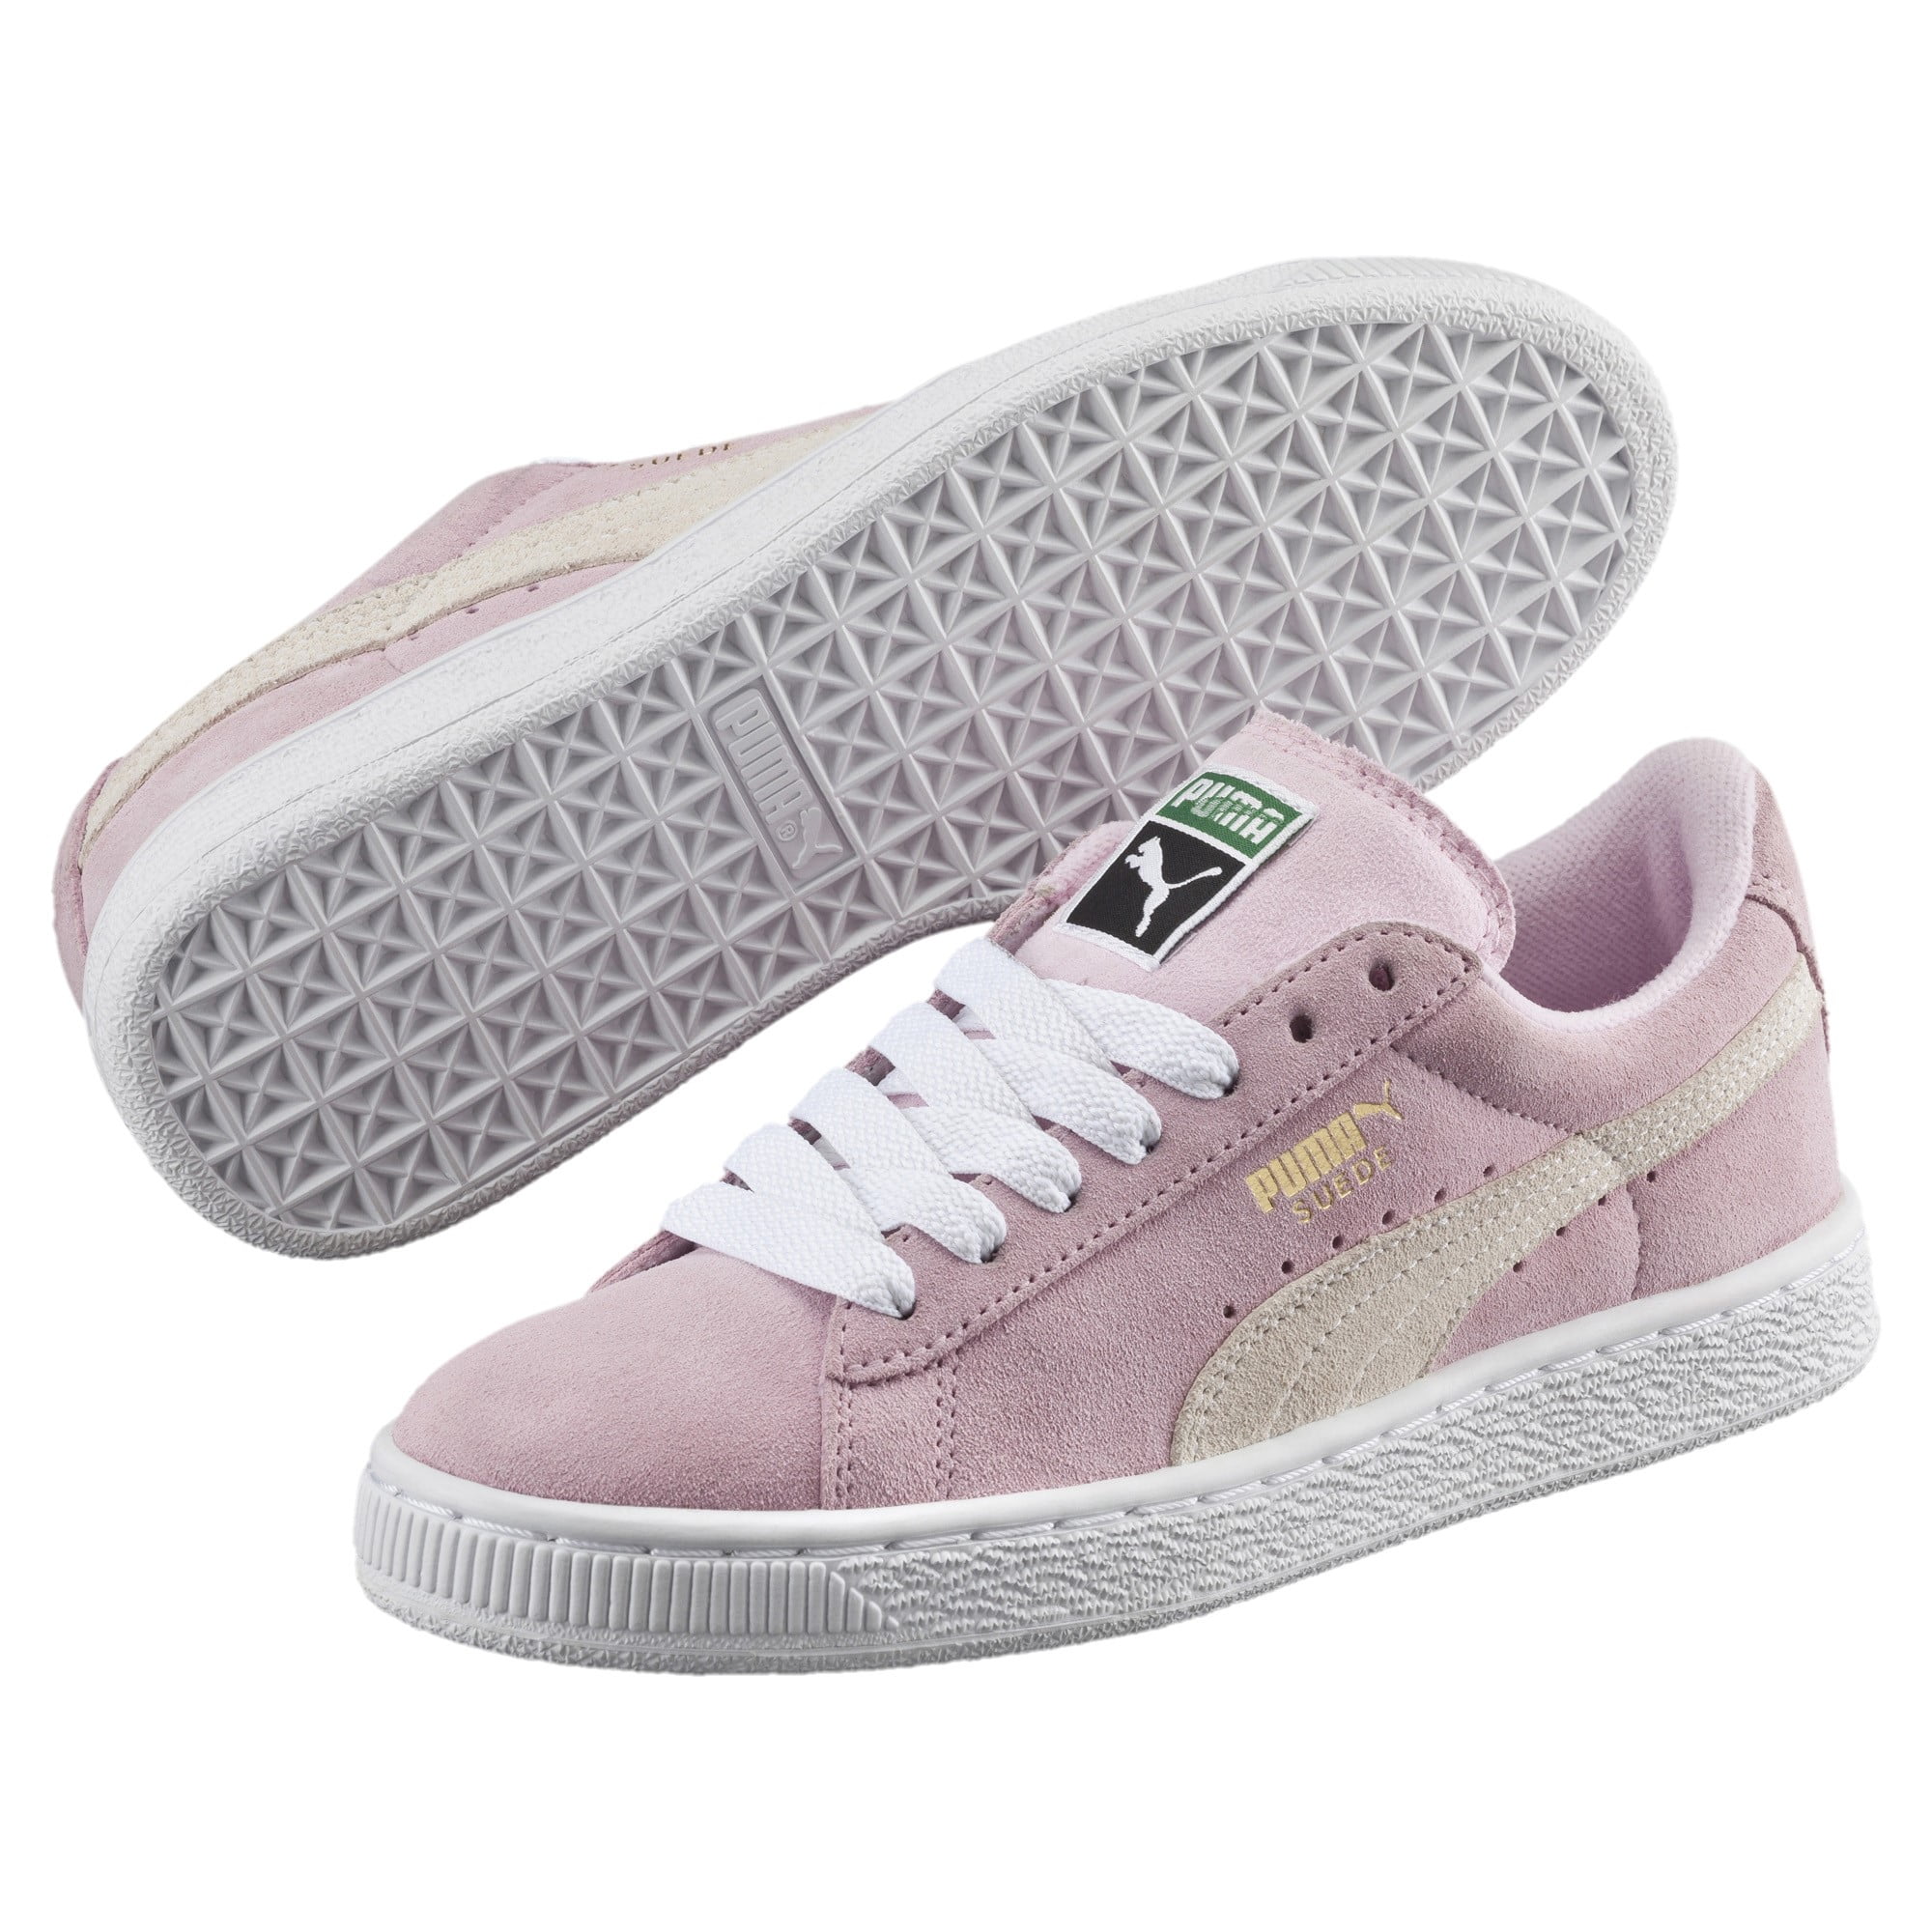 Puma Suede PS Little Kids Shoes Pink Lady/White/ P.T Gold 360757-30 ...